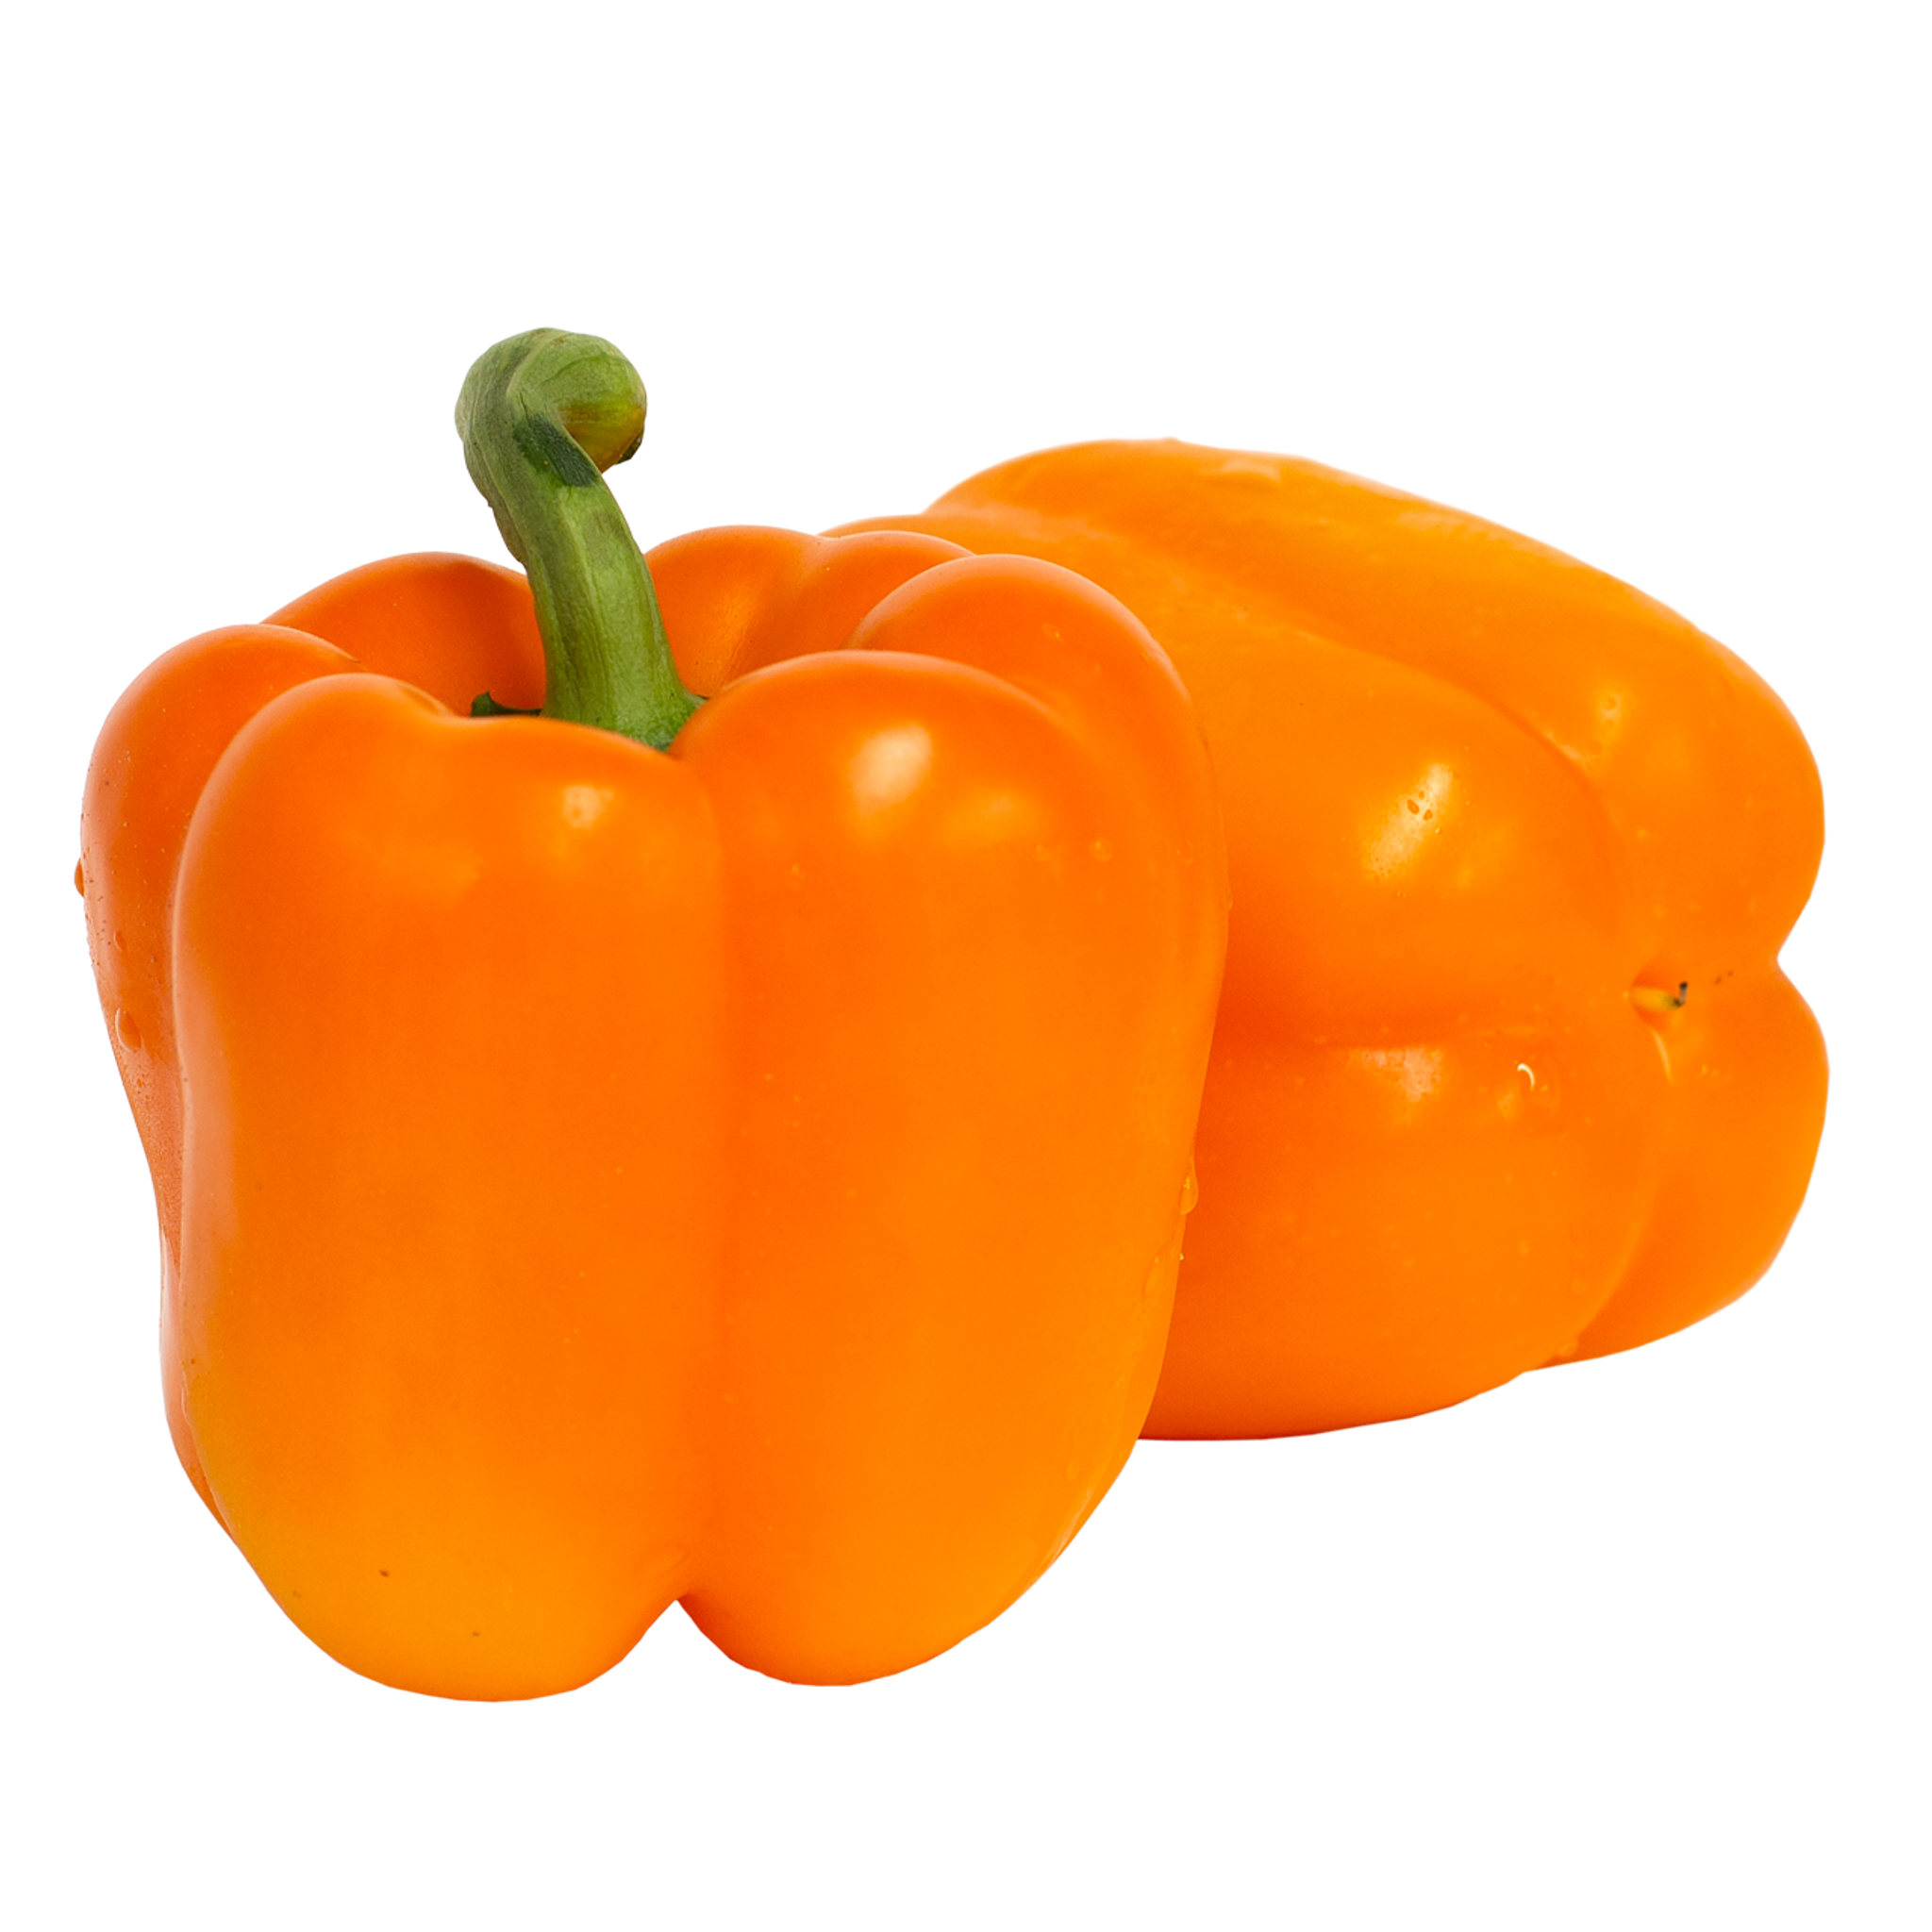 Orange Bell Peppers 1 Lb. - Wholey's Curbside